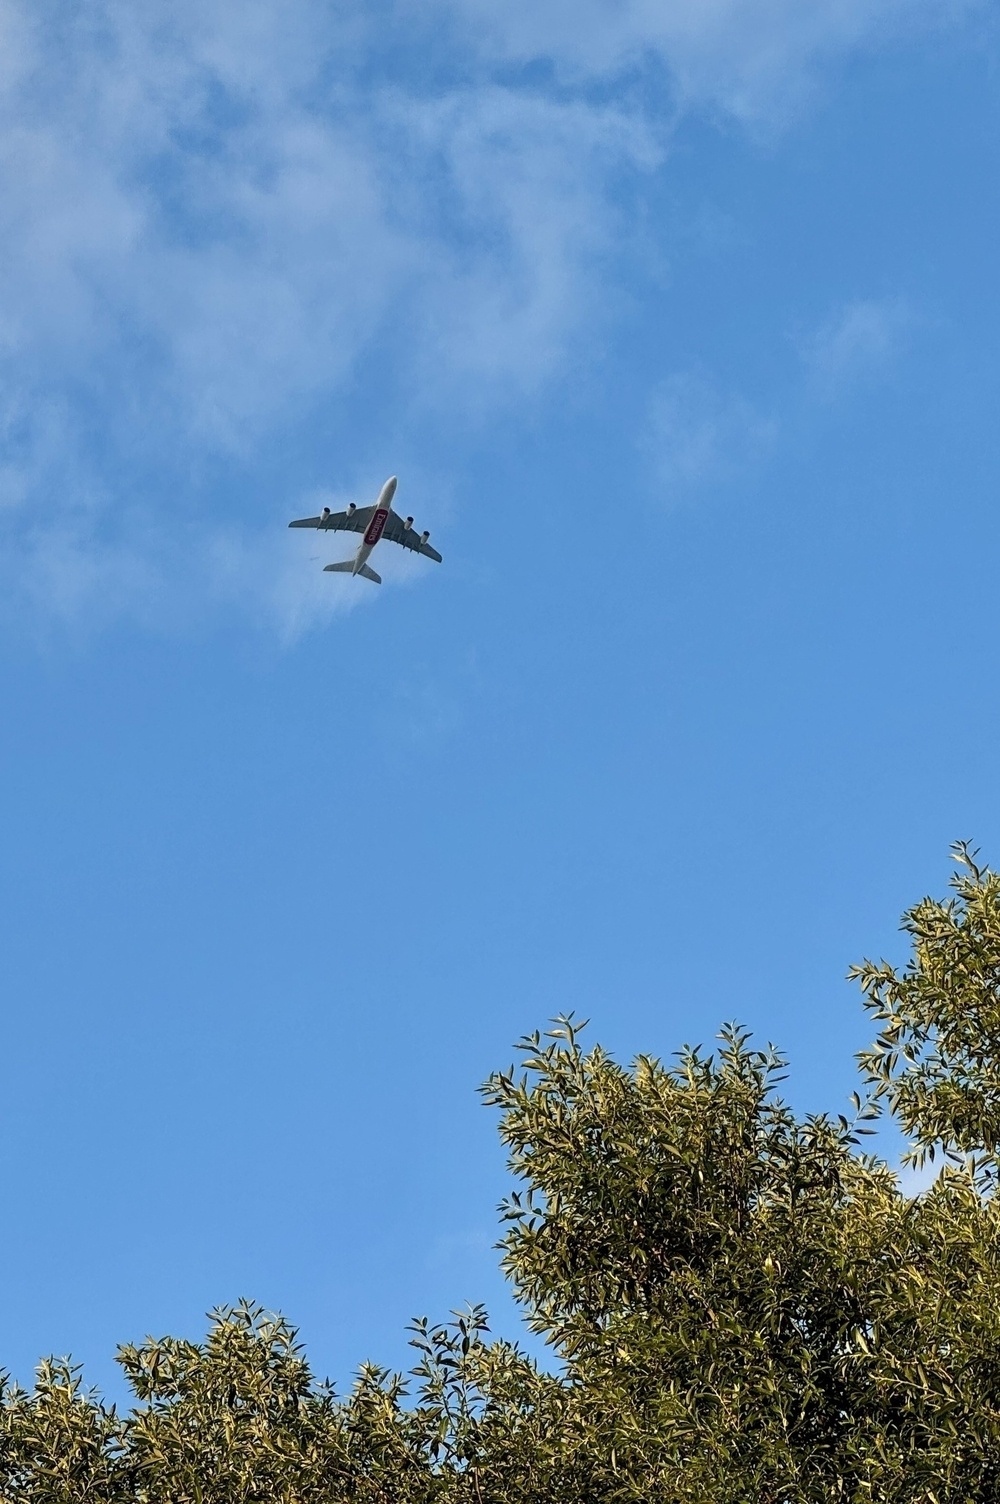 An A380 plane approaching London Heathrow, with trees below.